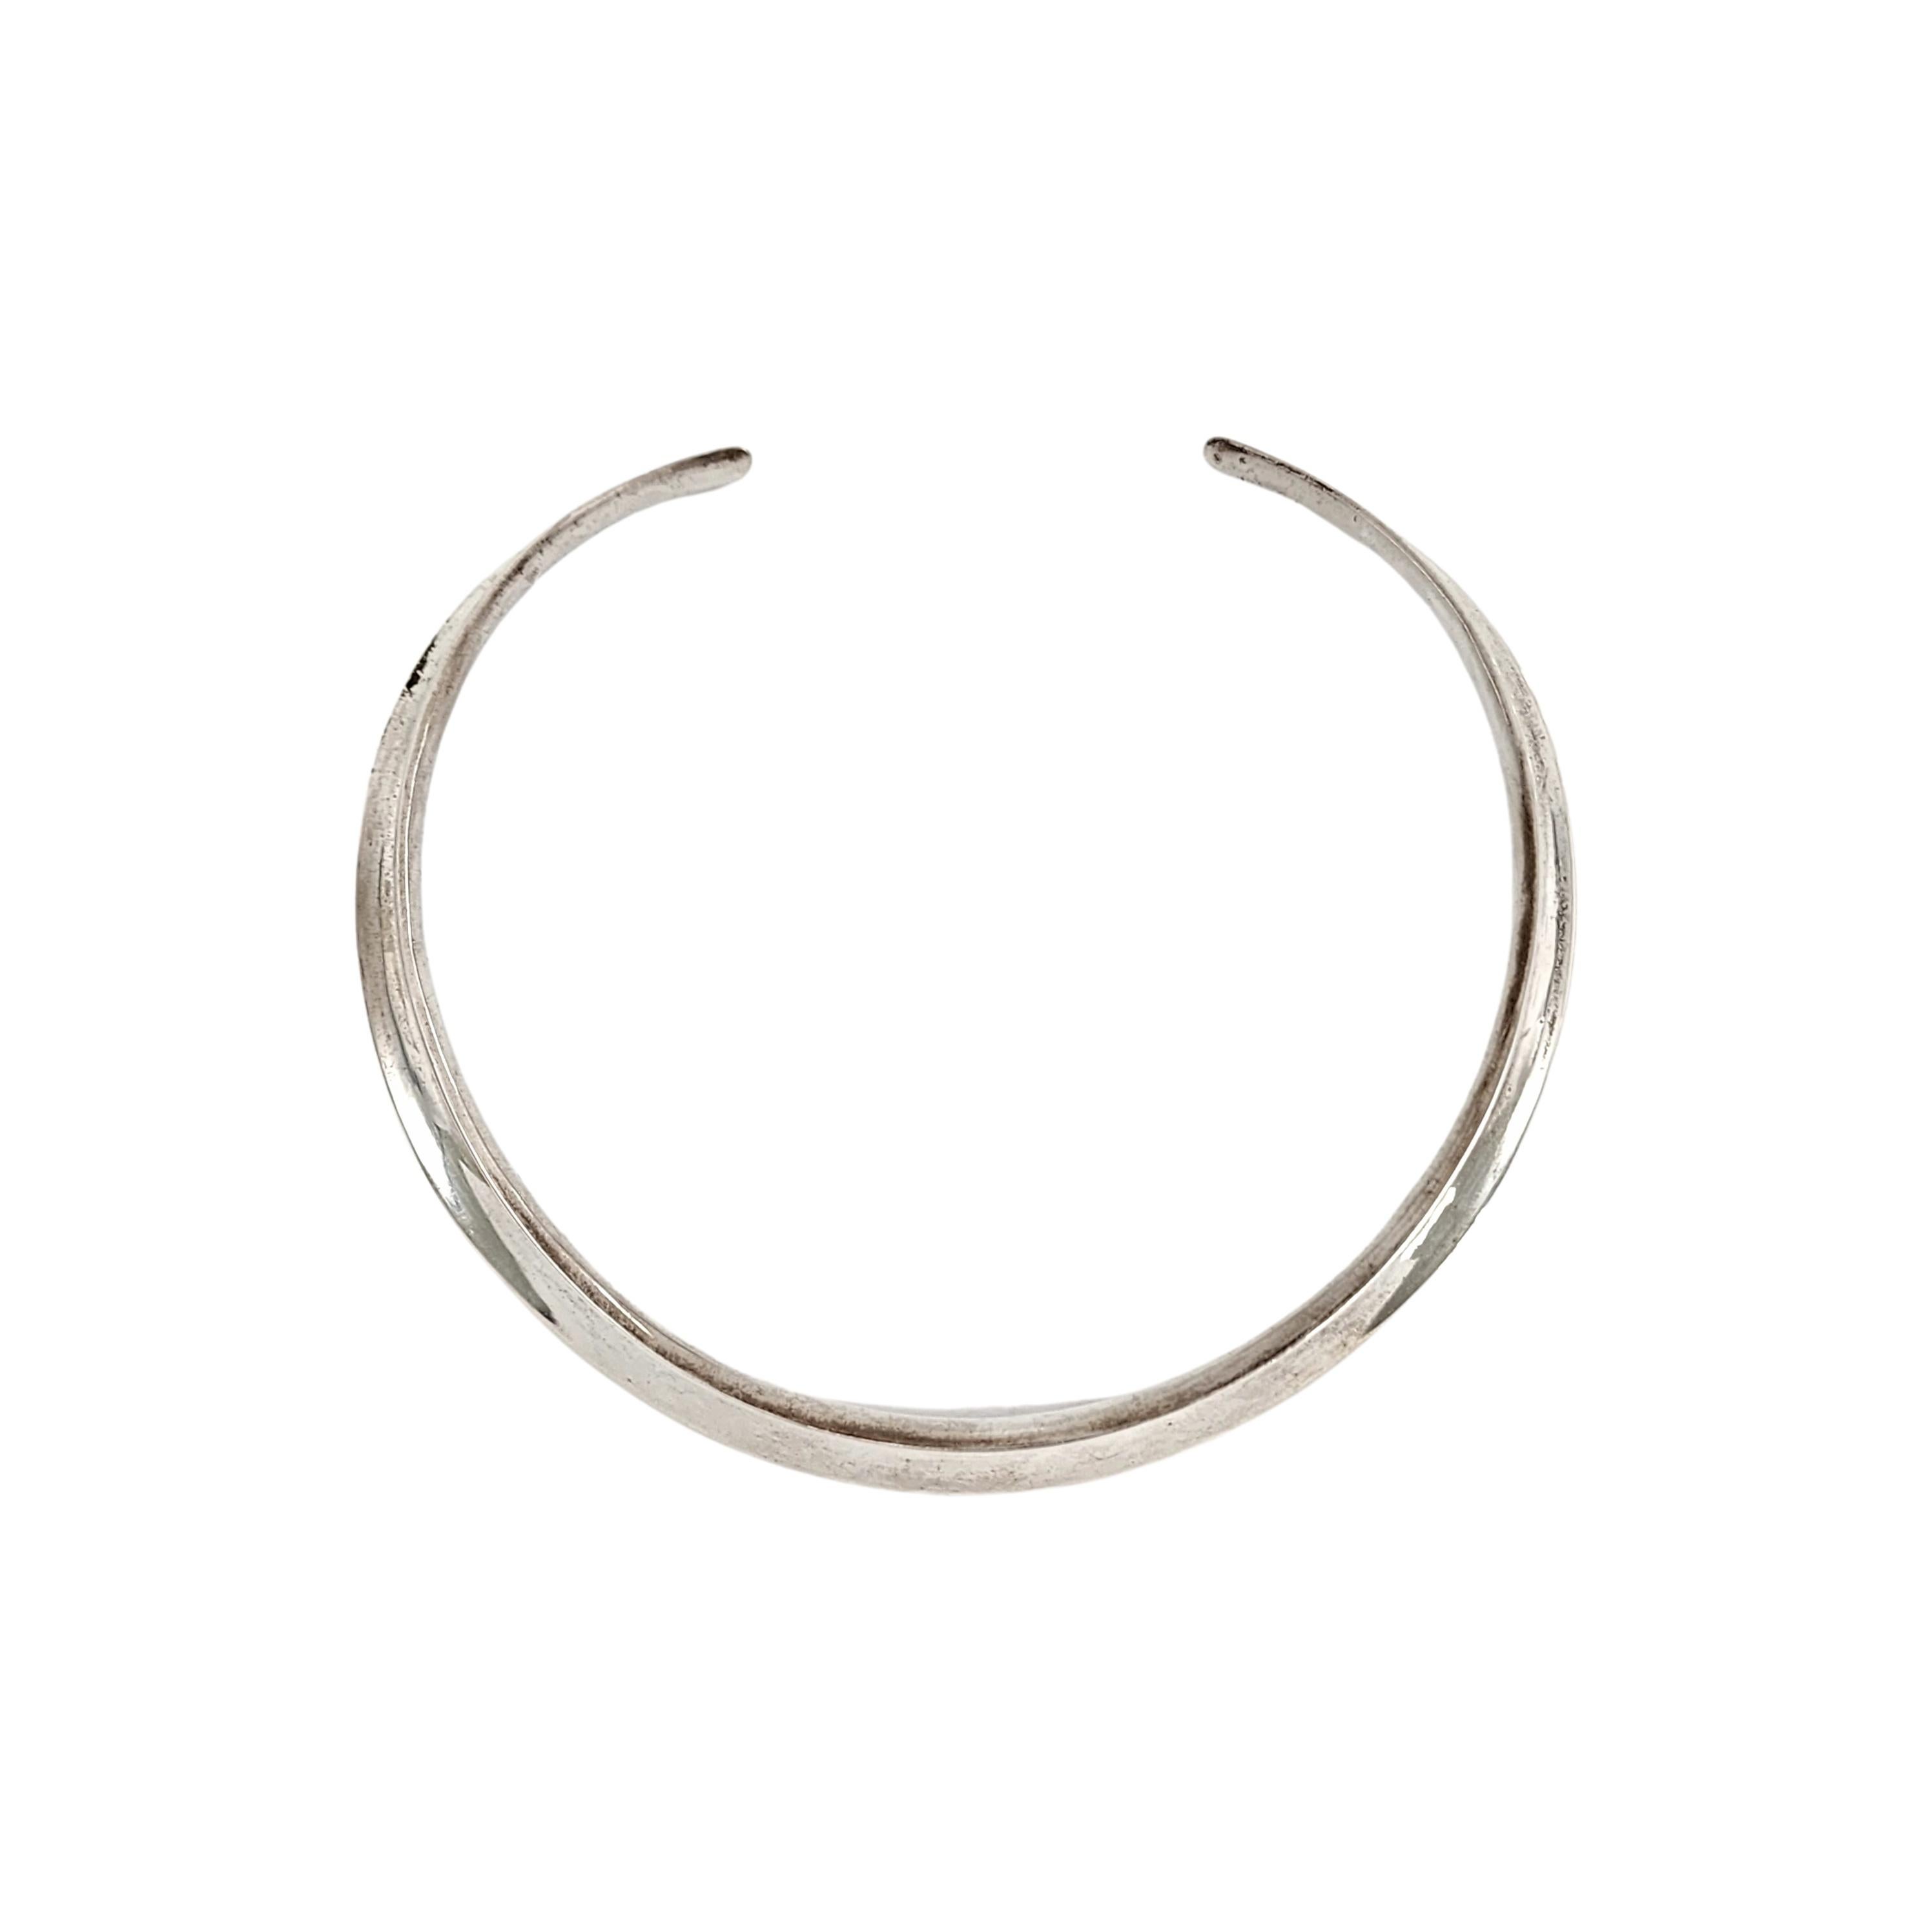 Vintage sterling silver neck ring collar necklace by Palle Bisgaard of Denmark.

Pattern # 2, a simple modern concave design neck ring.

Measures approx 13